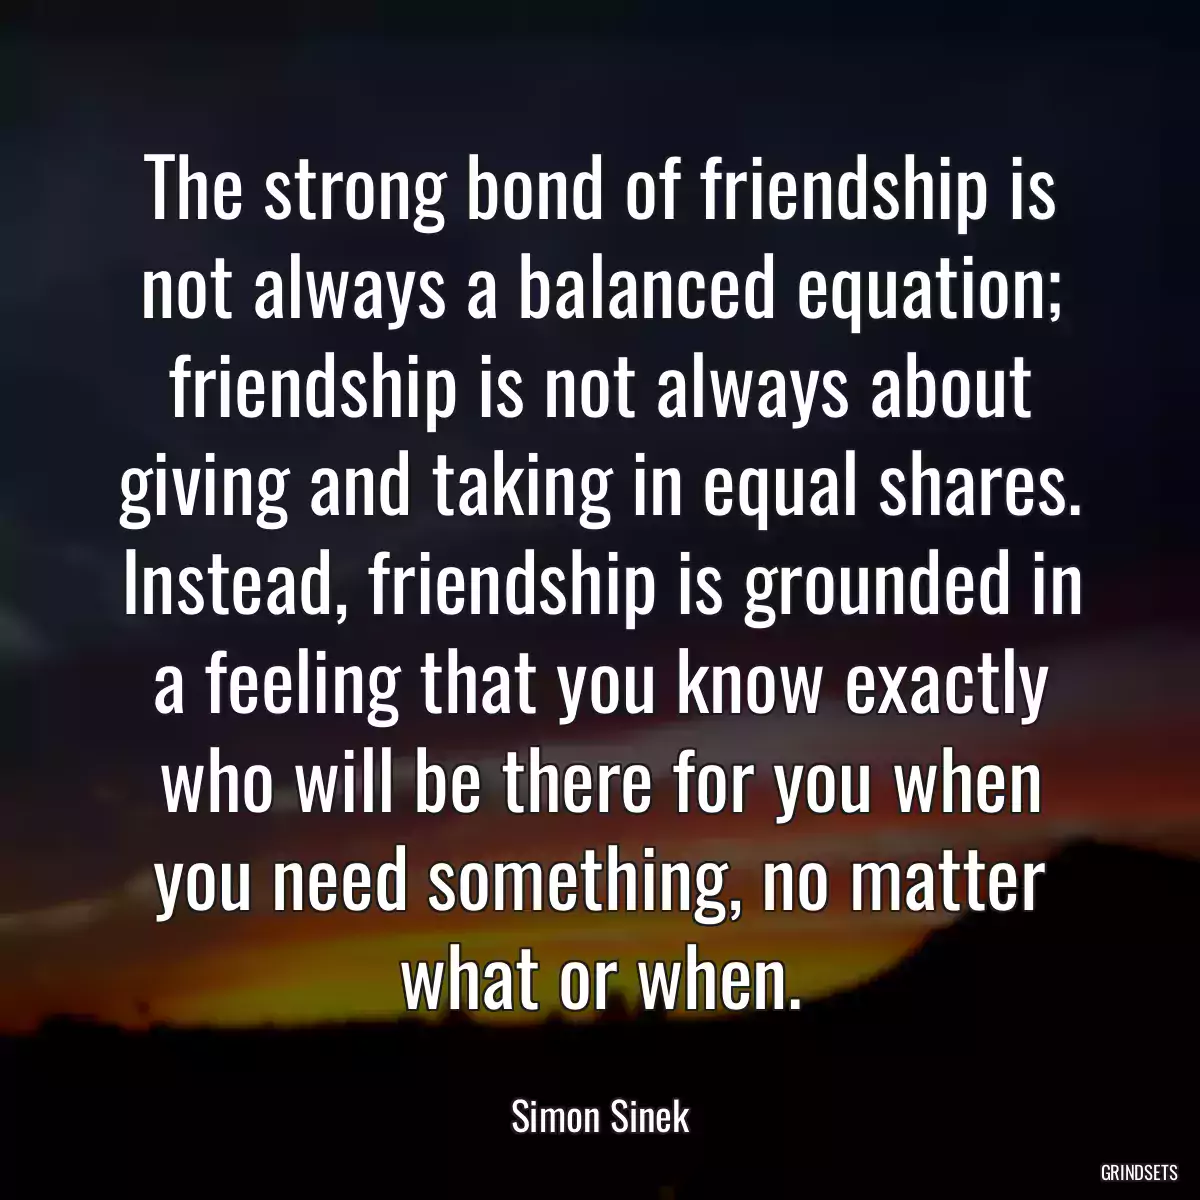 The strong bond of friendship is not always a balanced equation; friendship is not always about giving and taking in equal shares. Instead, friendship is grounded in a feeling that you know exactly who will be there for you when you need something, no matter what or when.